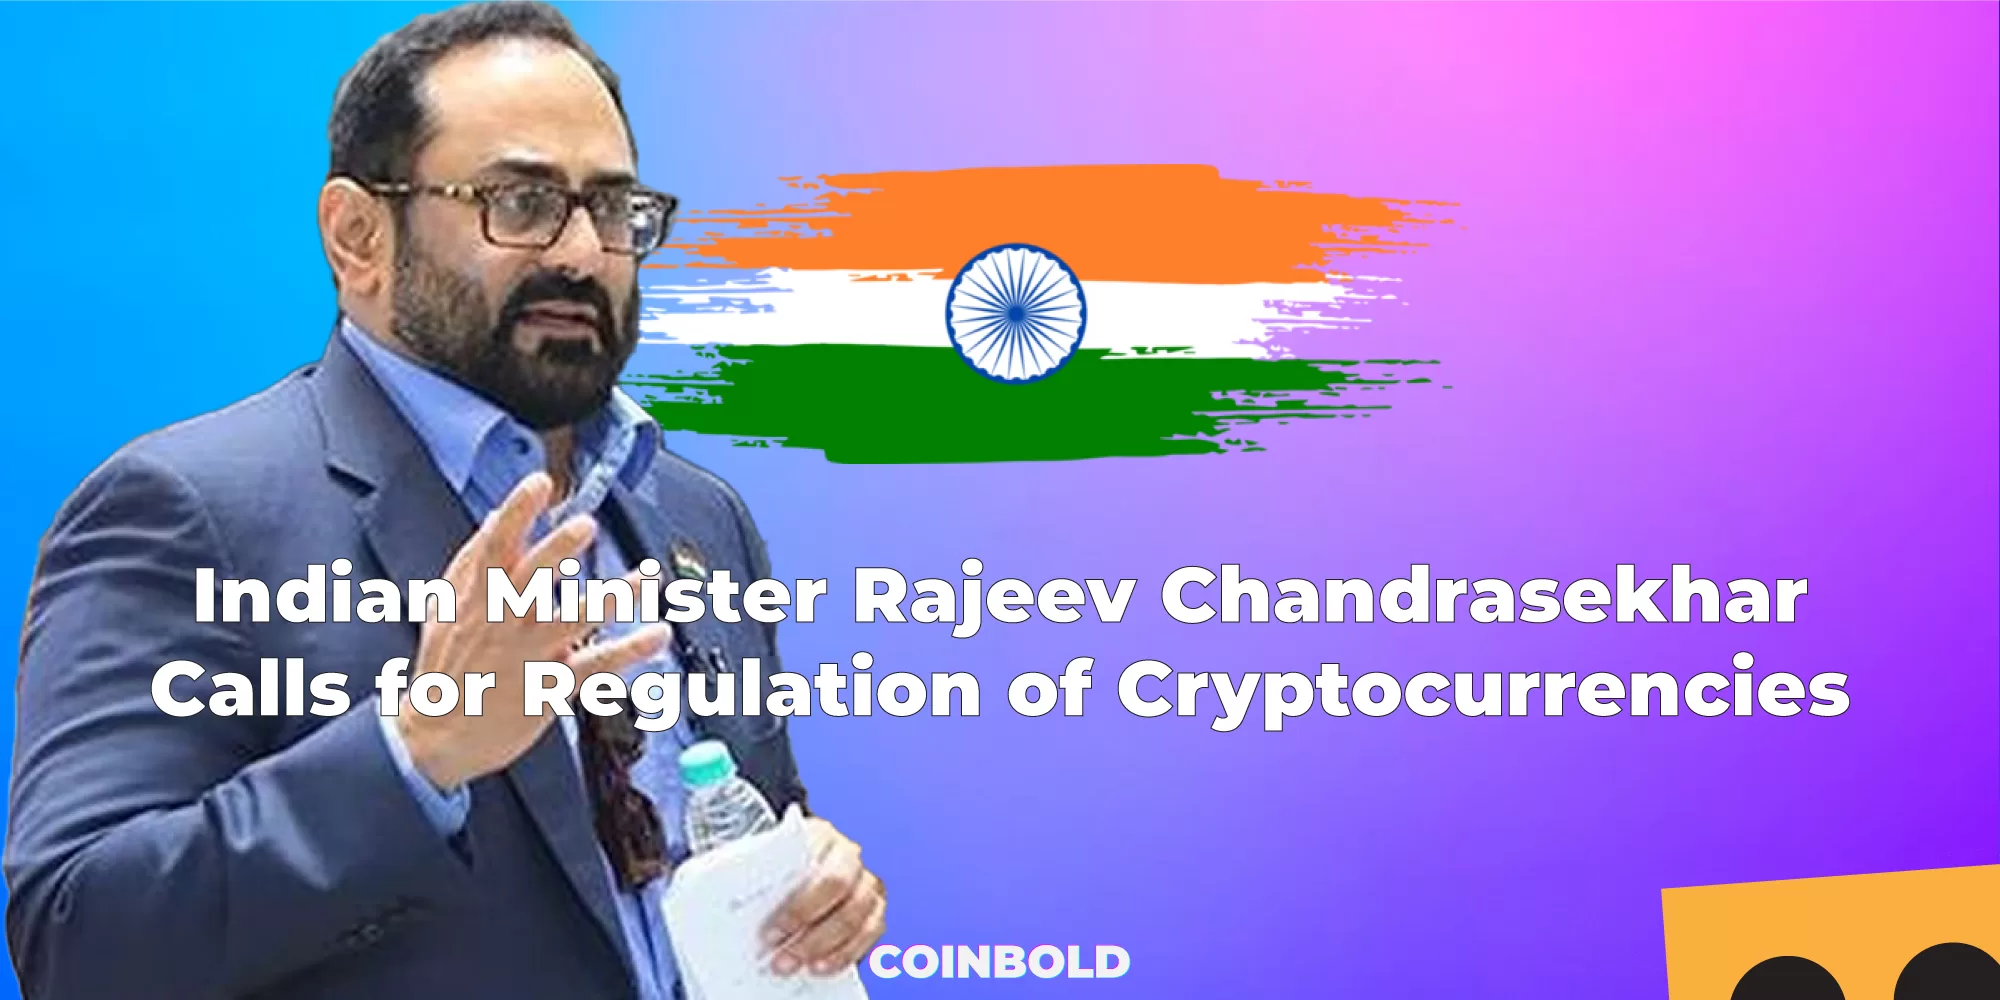 Indian Minister Rajeev Chandrasekhar Calls for Regulation of Cryptocurrencies